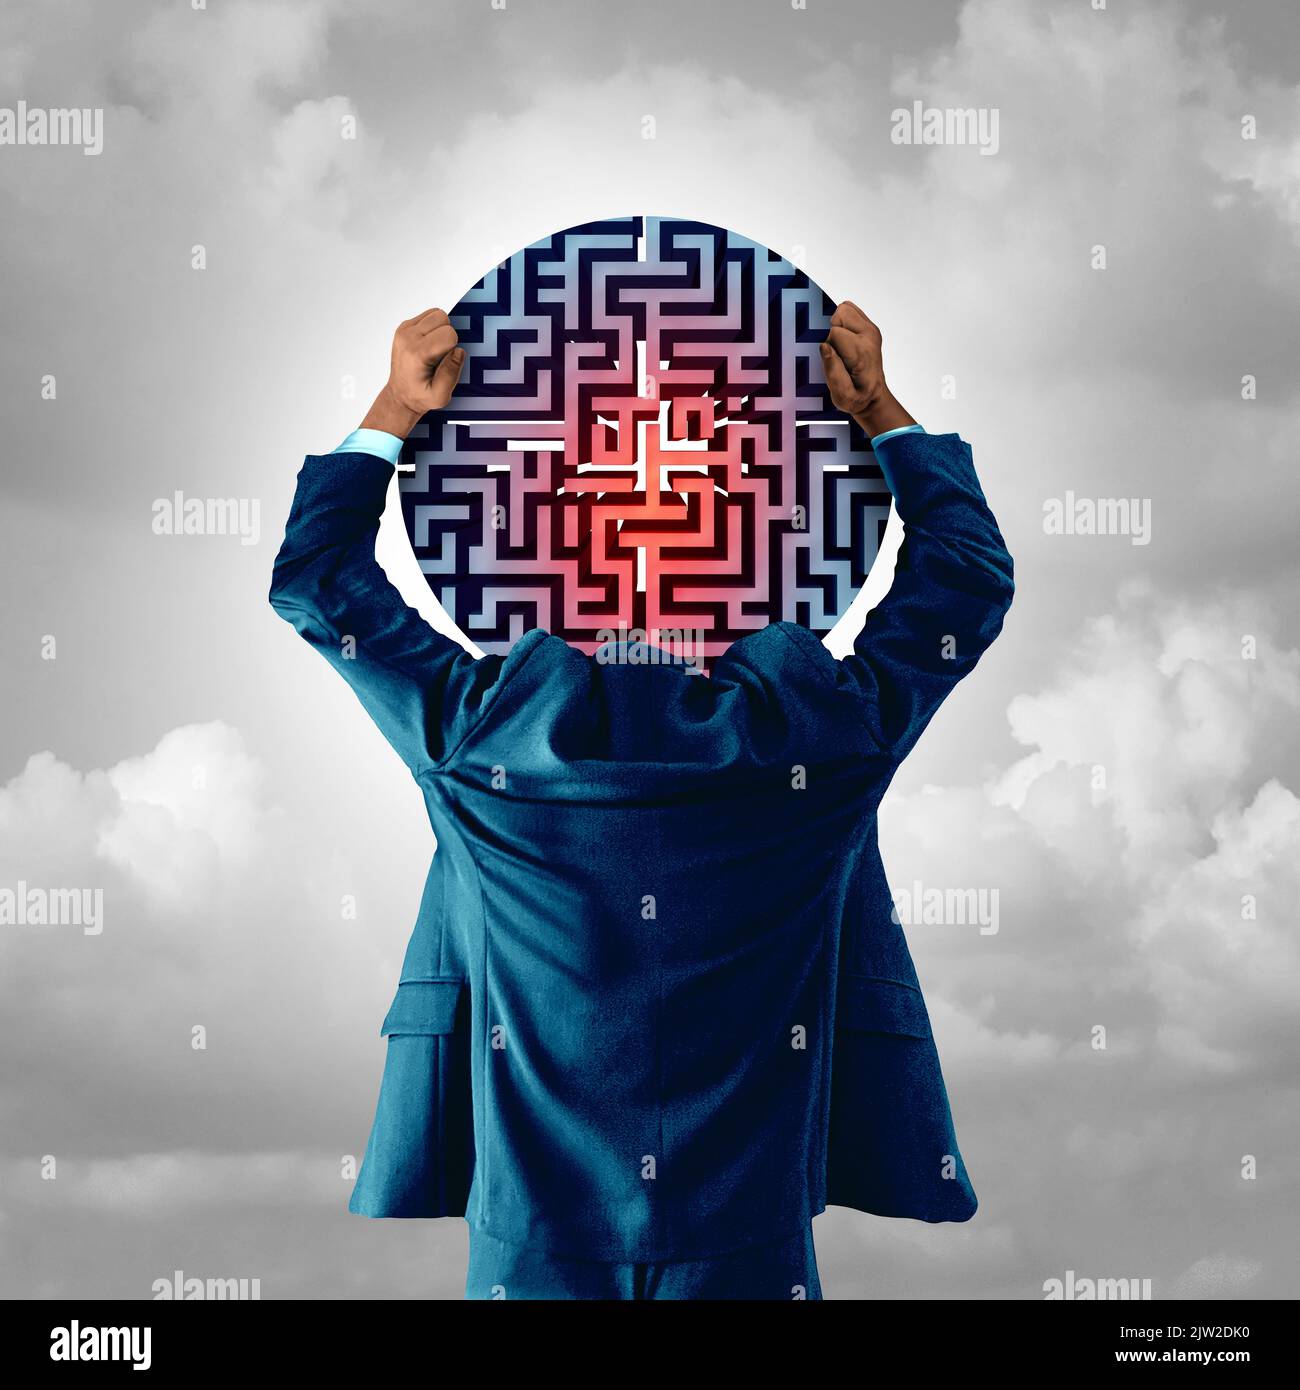 Psychology challenges and Schizophrenia psychiatric disease or mental disorder as a psychiatry and psychological concept for human abnormal. Stock Photo